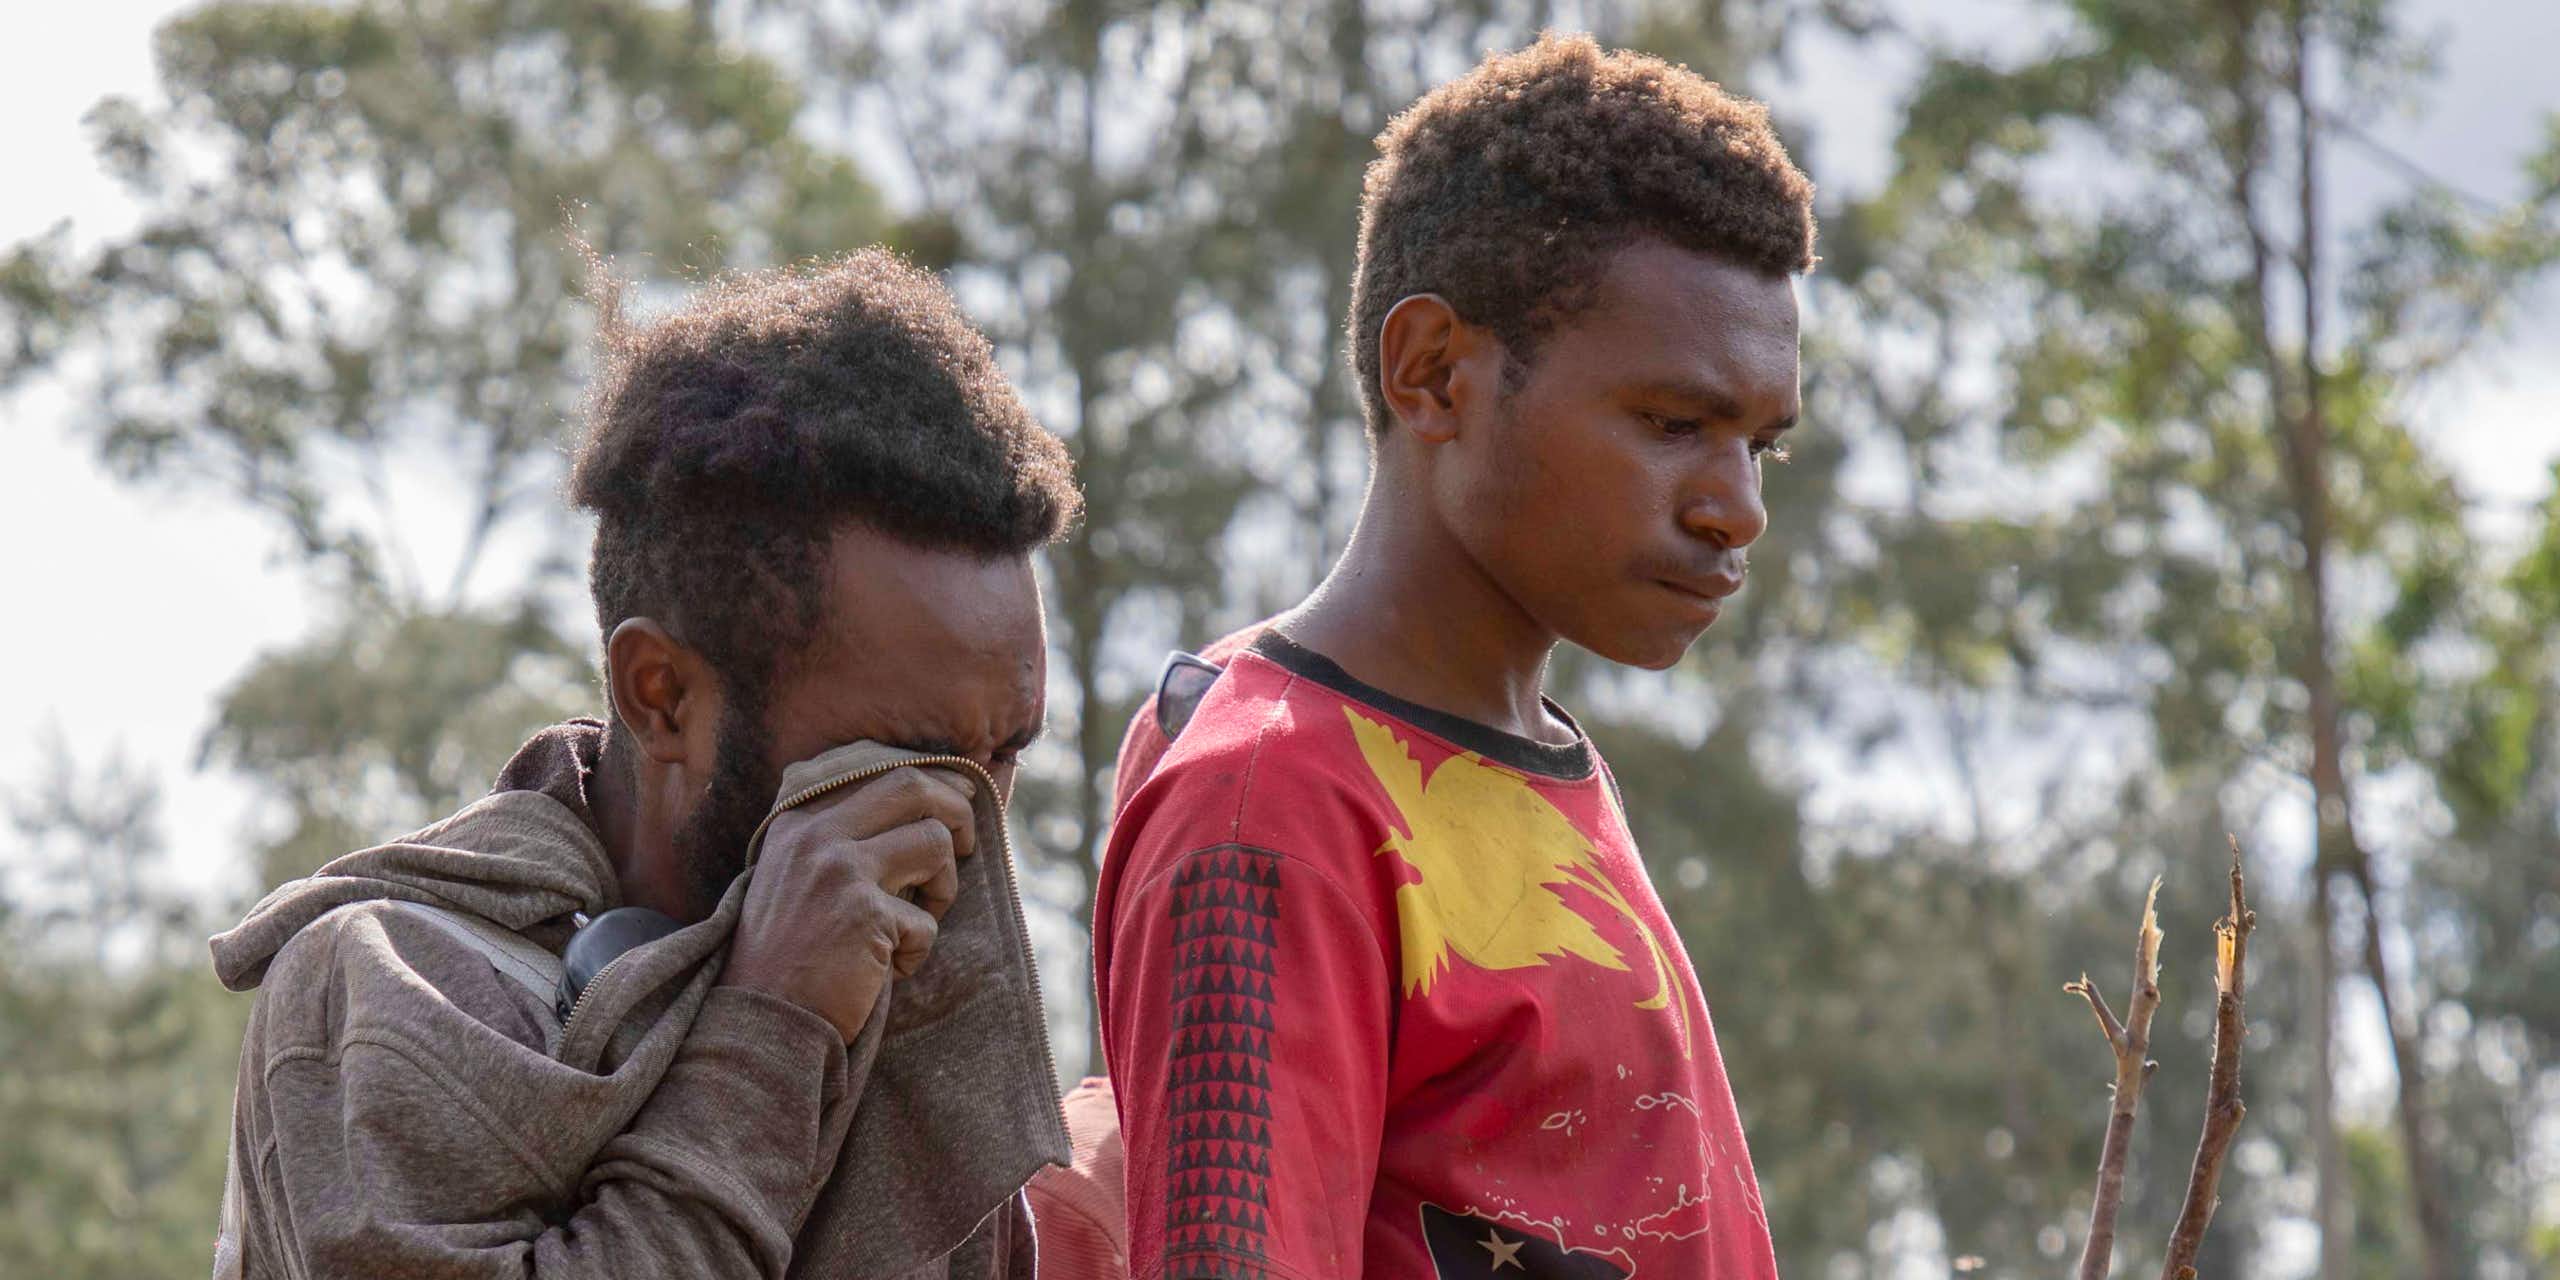 From injuries to infectious diseases, what are the health risks in the aftermath of PNG’s landslide?